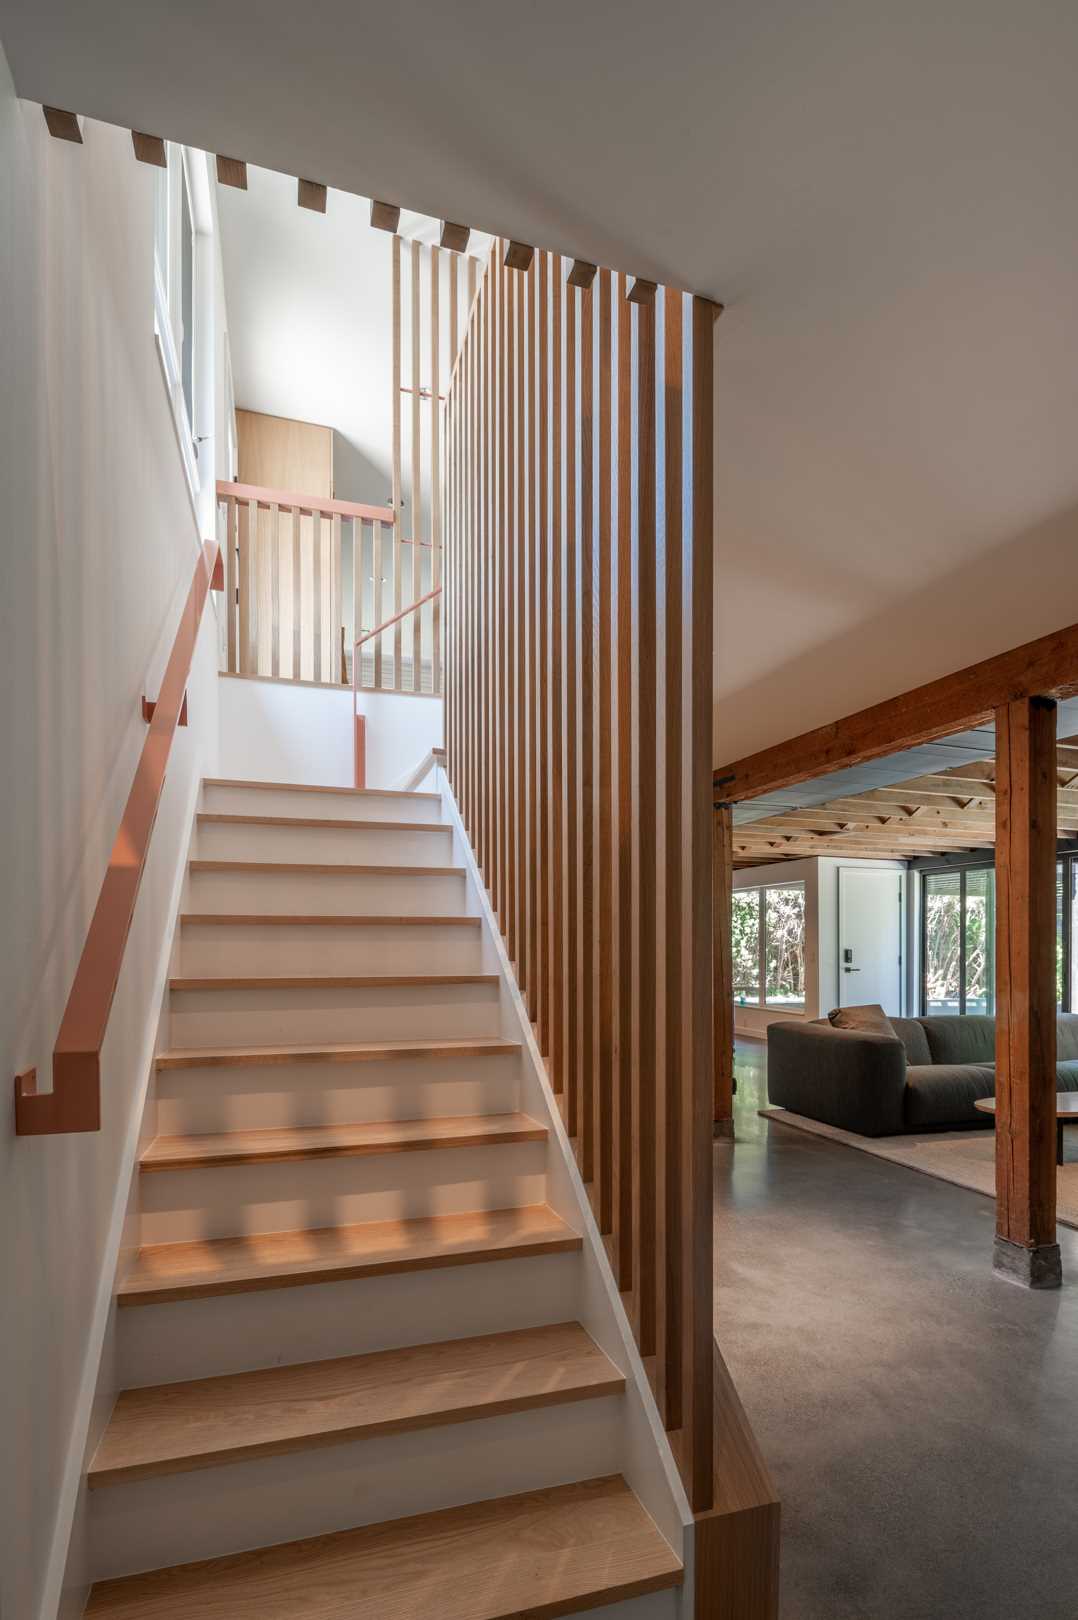 The remodeled basement stairs are now bright and open, with wood slat partitions and cabinetry helping to hide them.